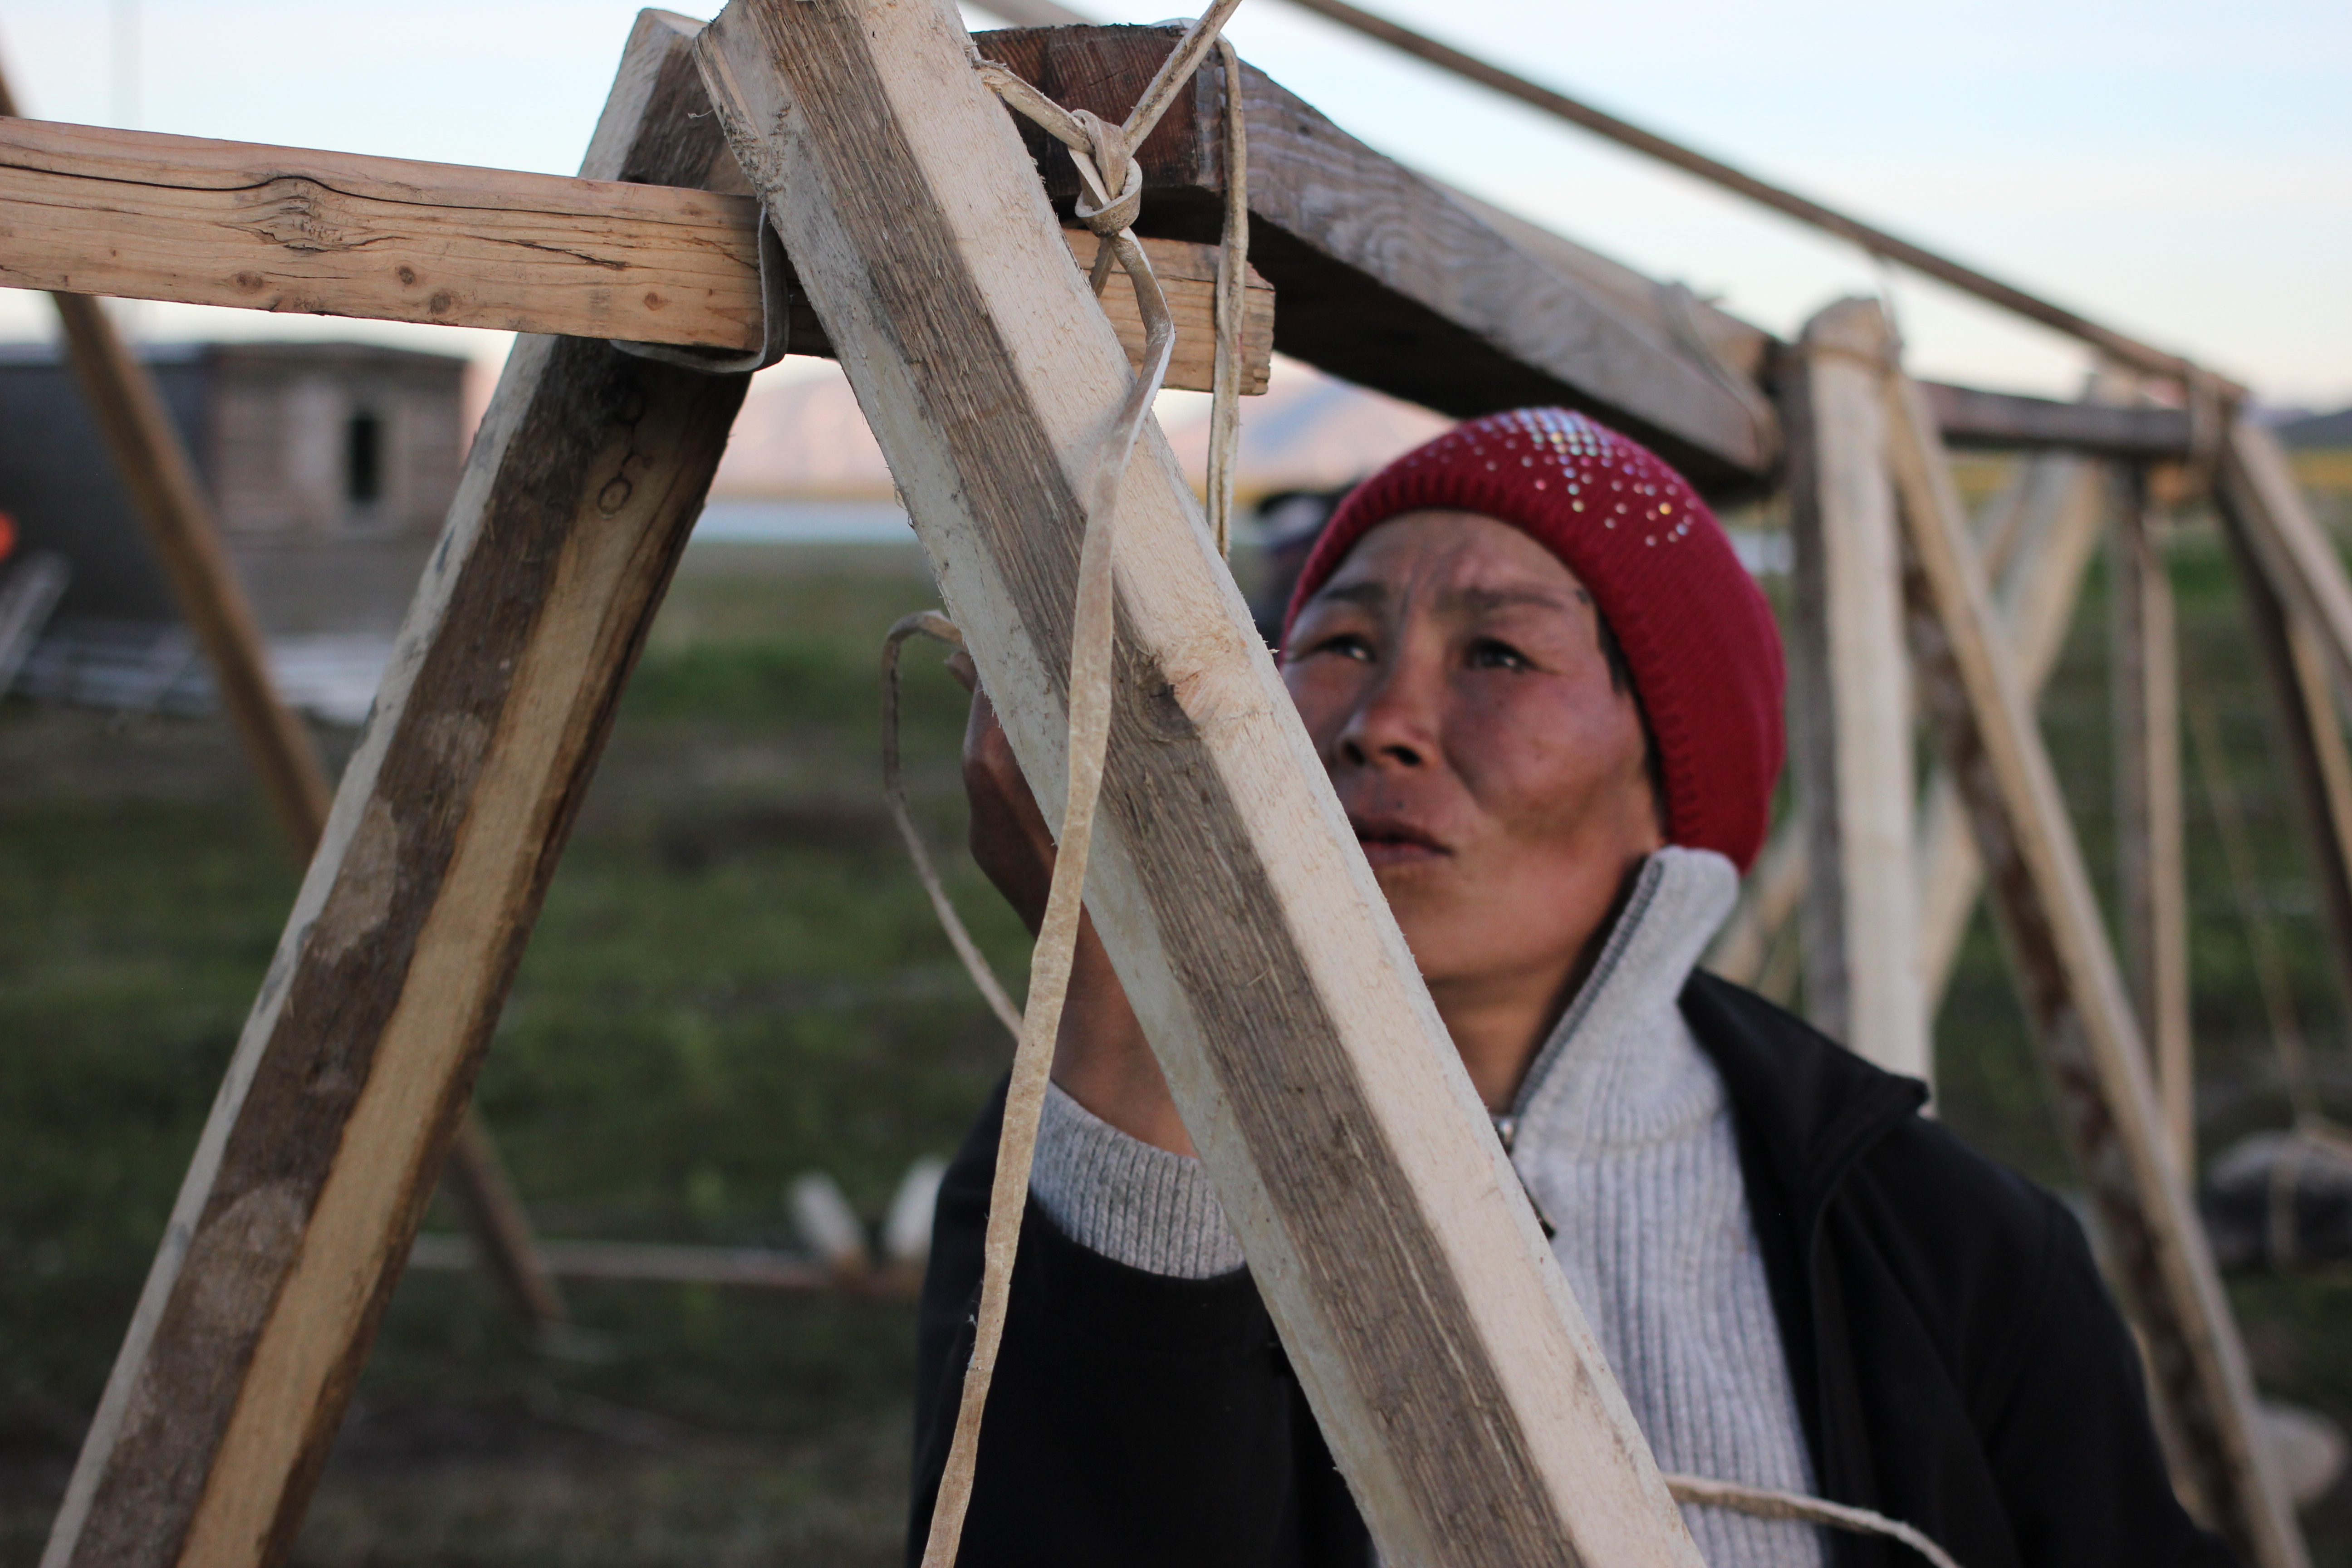 A Chukchi woman uses sealskin cord and wood beams to build a yaranga at Senyavin Hot Springs, June 2016. When complete, the frame will be covered in reindeer hides. (Kirsten Swann / Alaska Dispatch News)